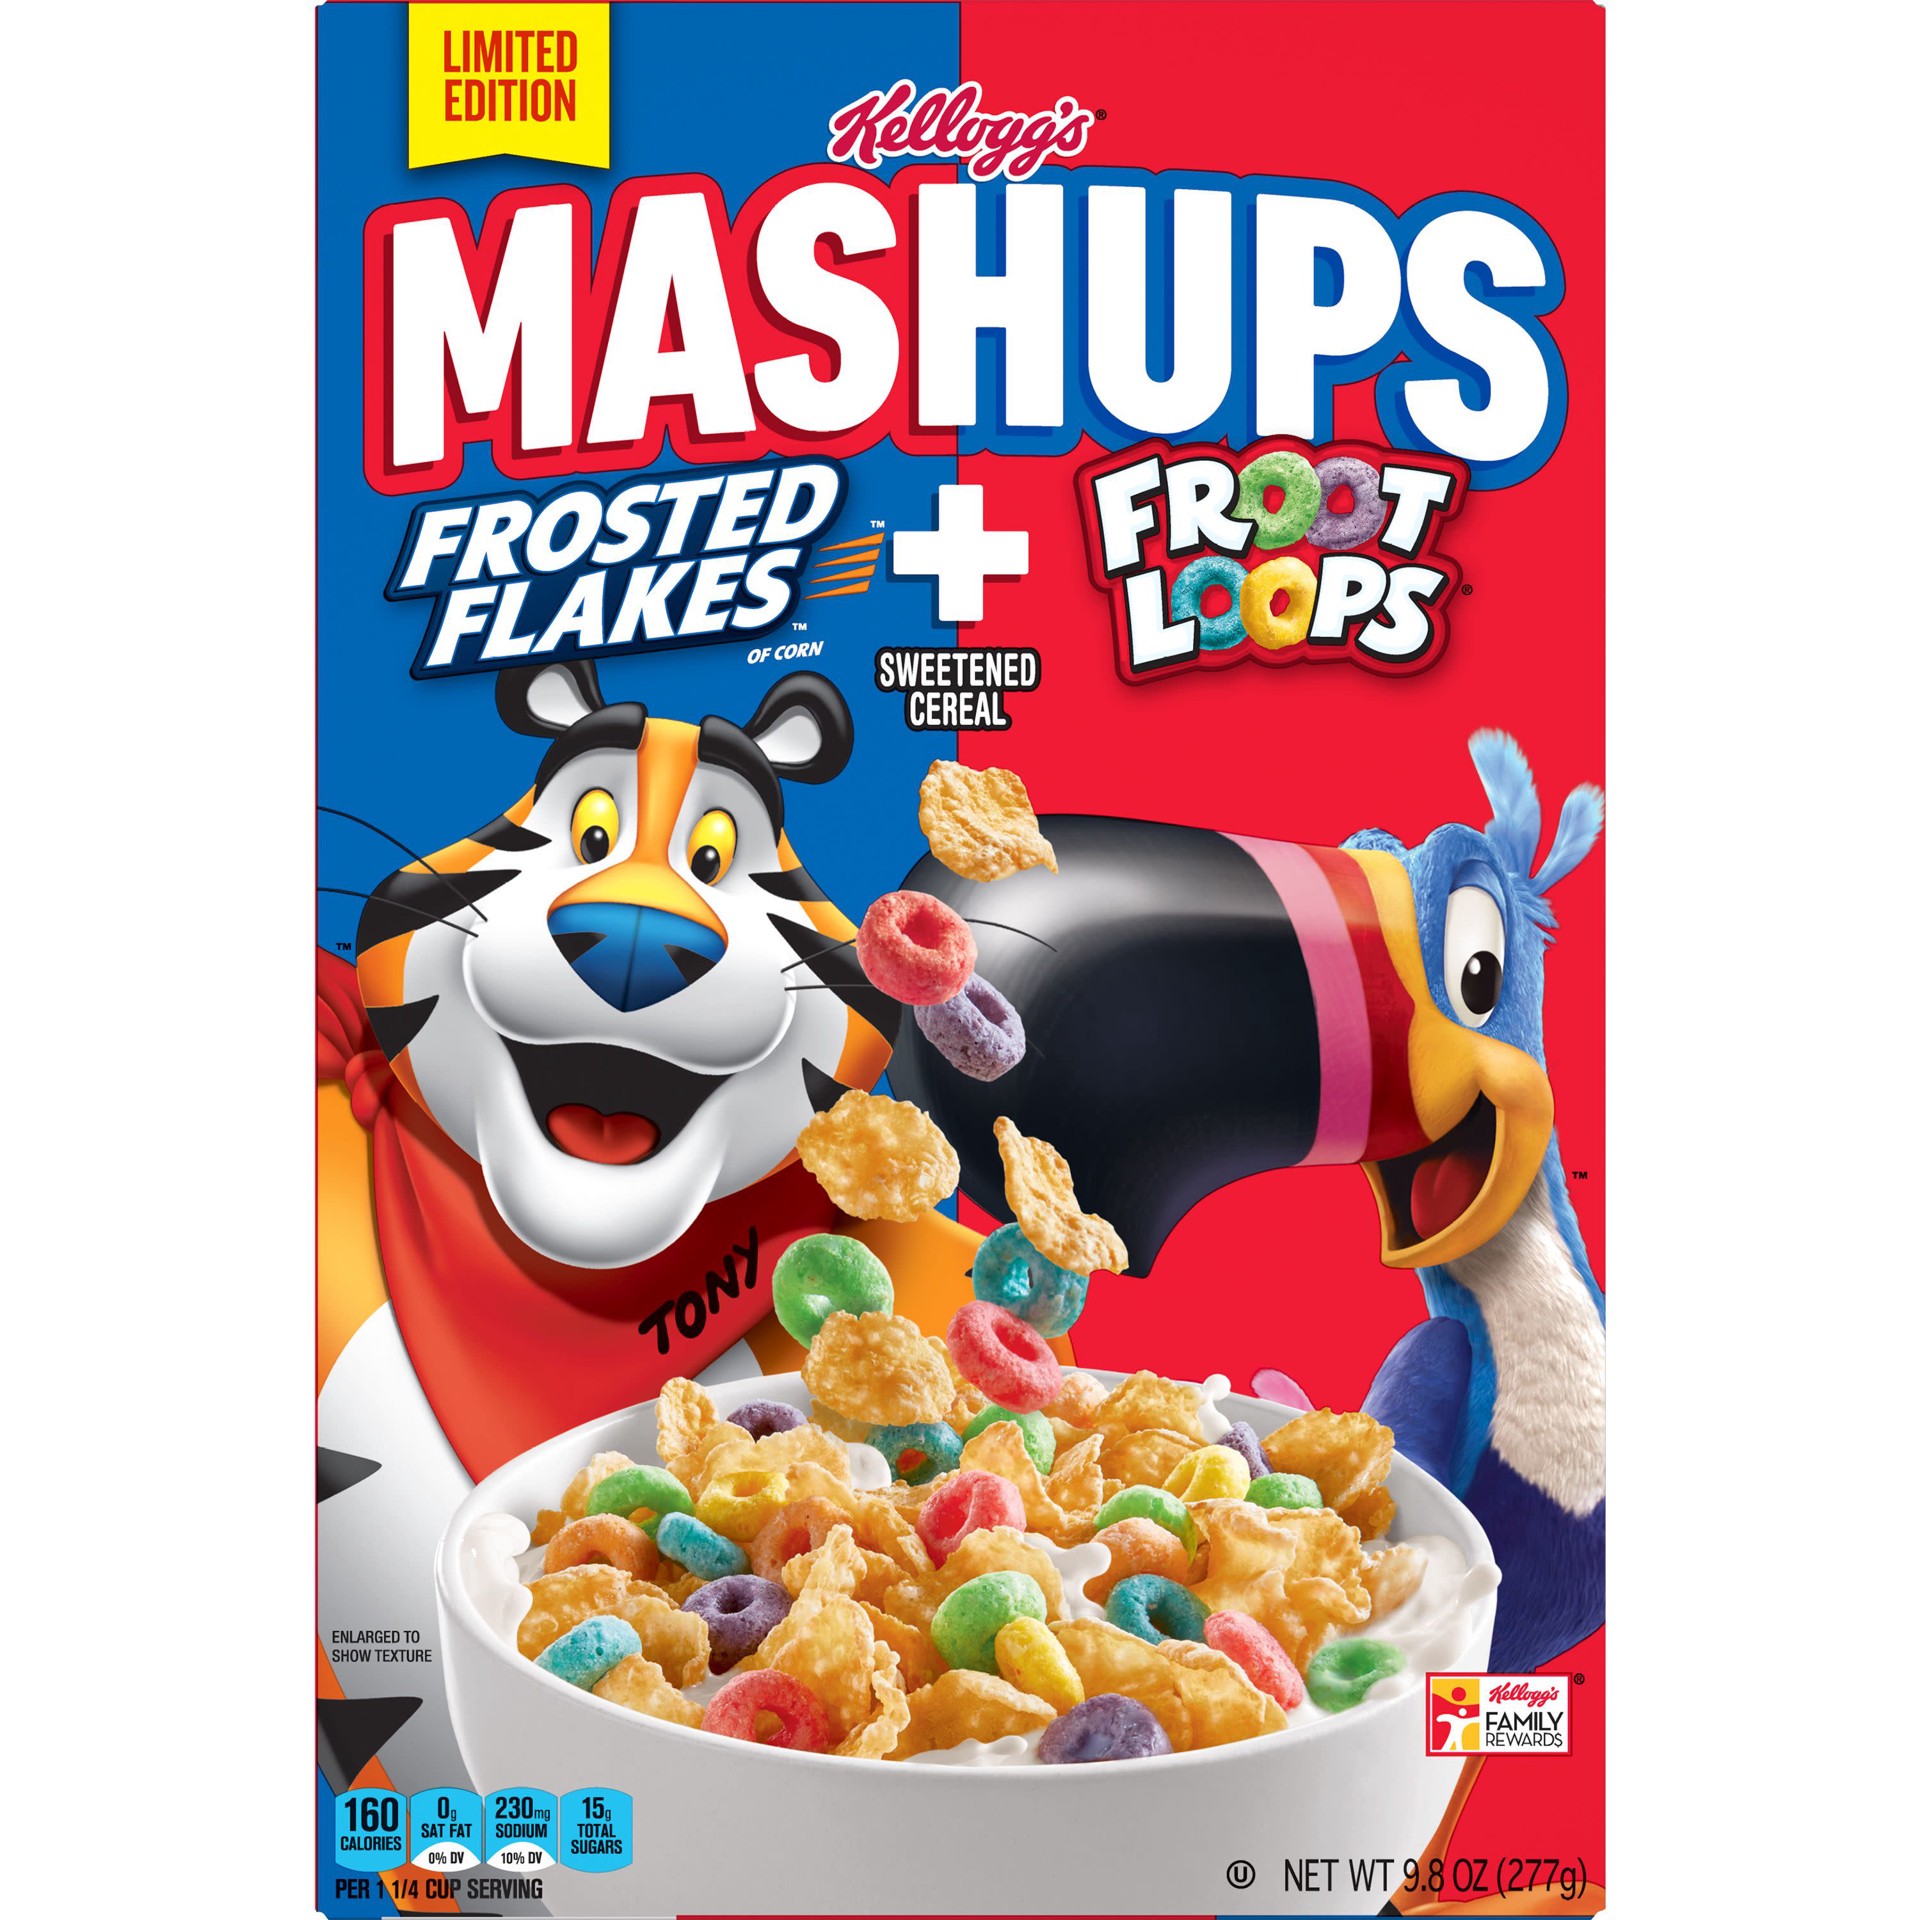 slide 3 of 5, Mashups Kellogg's Mashups Breakfast Cereal, Limited Edition, Kids Snacks, Frosted Flakes and Froot Loops, 9.8oz Box, 1 Box, 9.8 oz